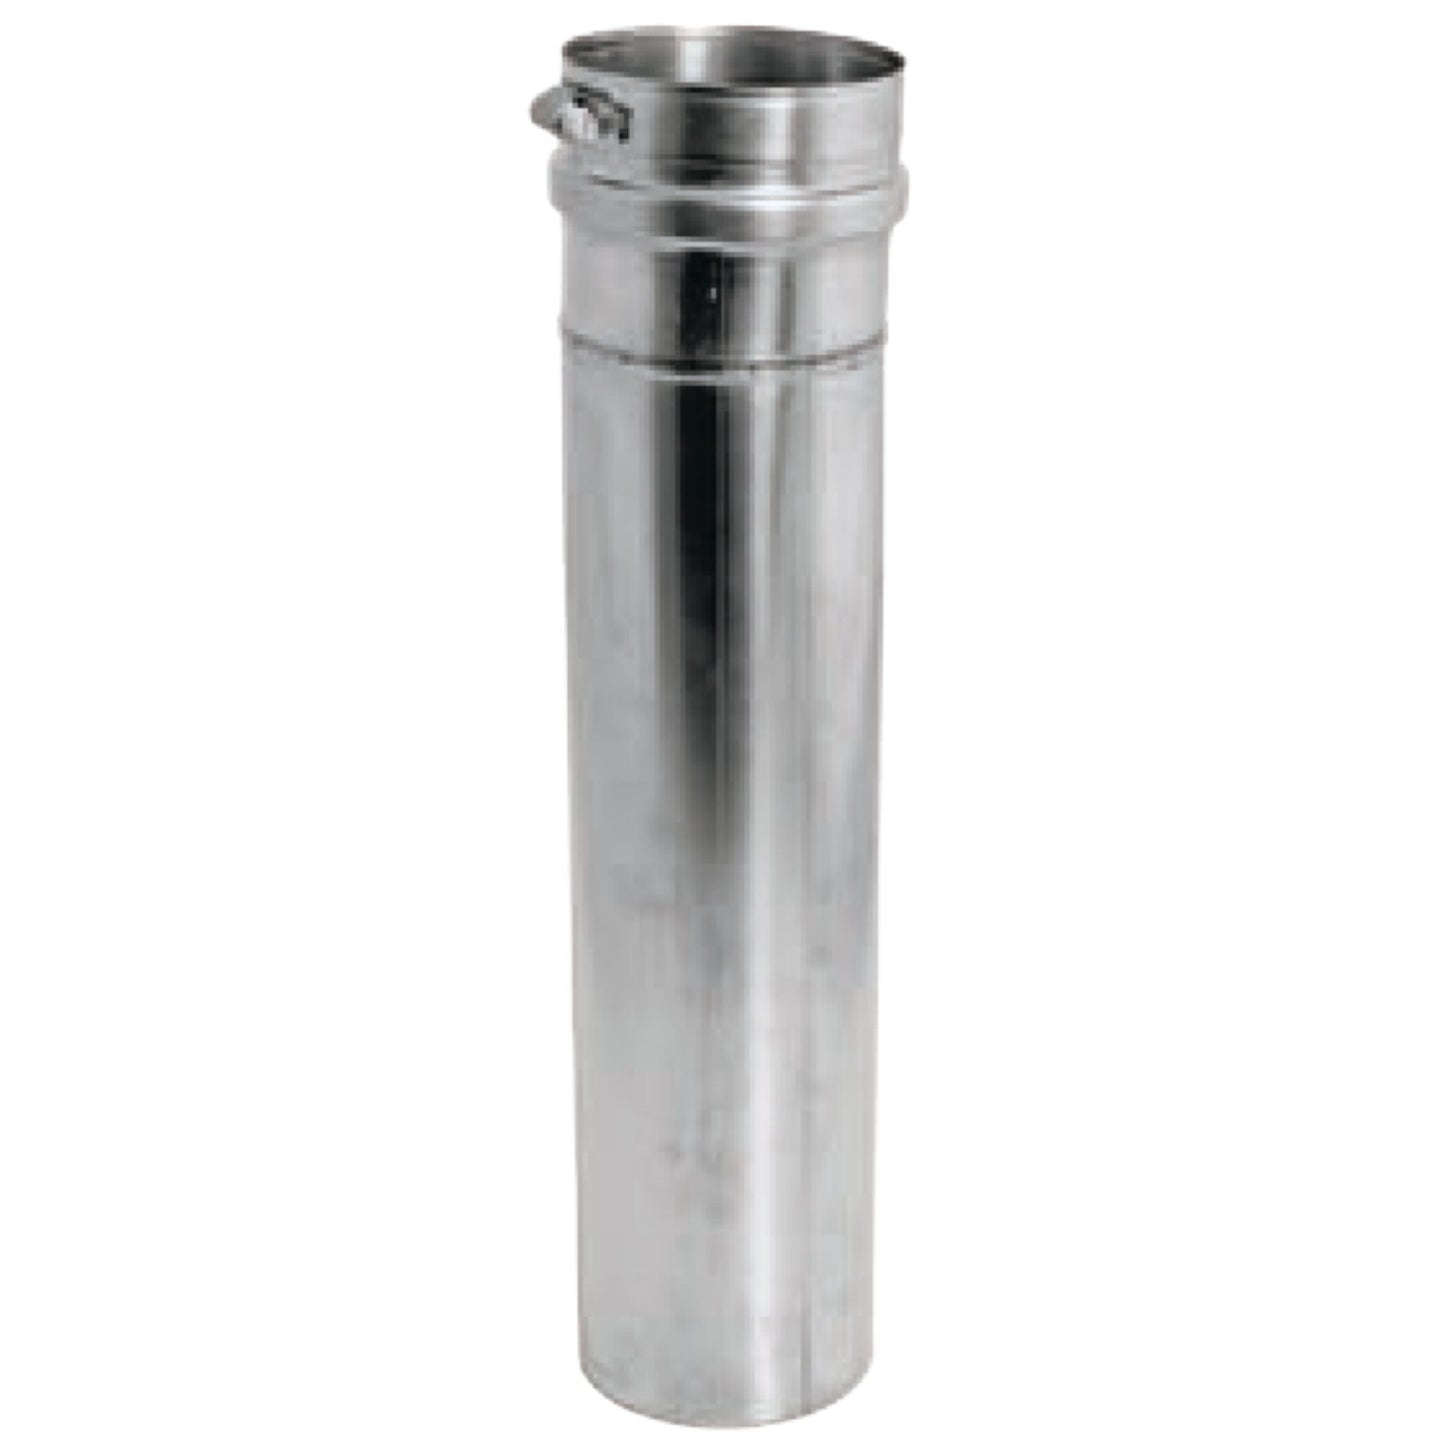 DuraVent FasNSeal 8" 2 Degree 29-4C Stainless Steel Adjustable Vent Length